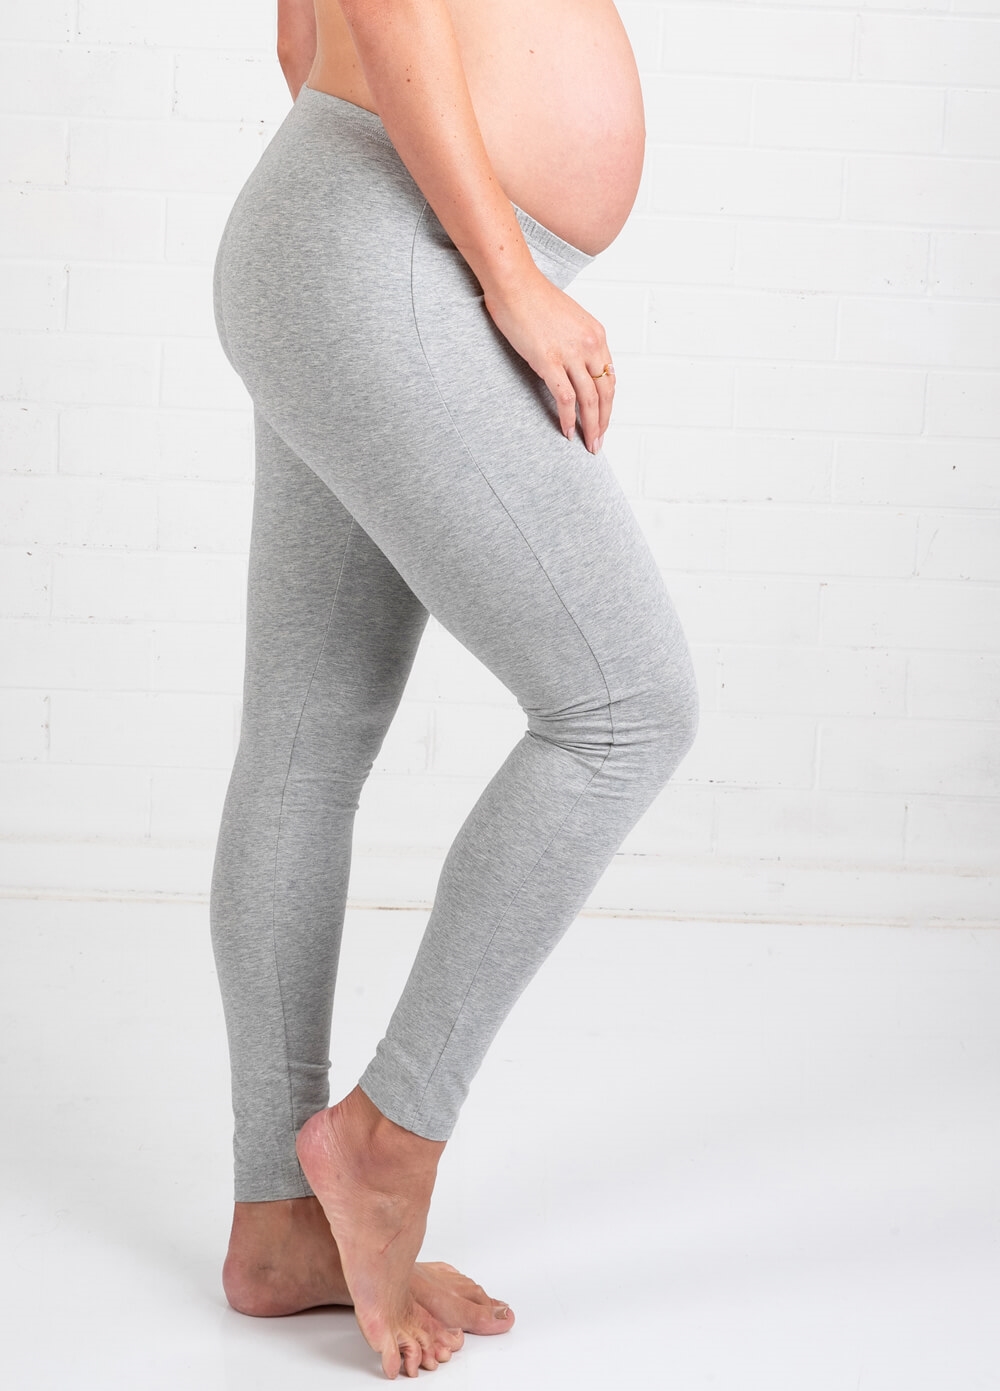 Oasis Grey Maternity Leggings by Trimester Clothing